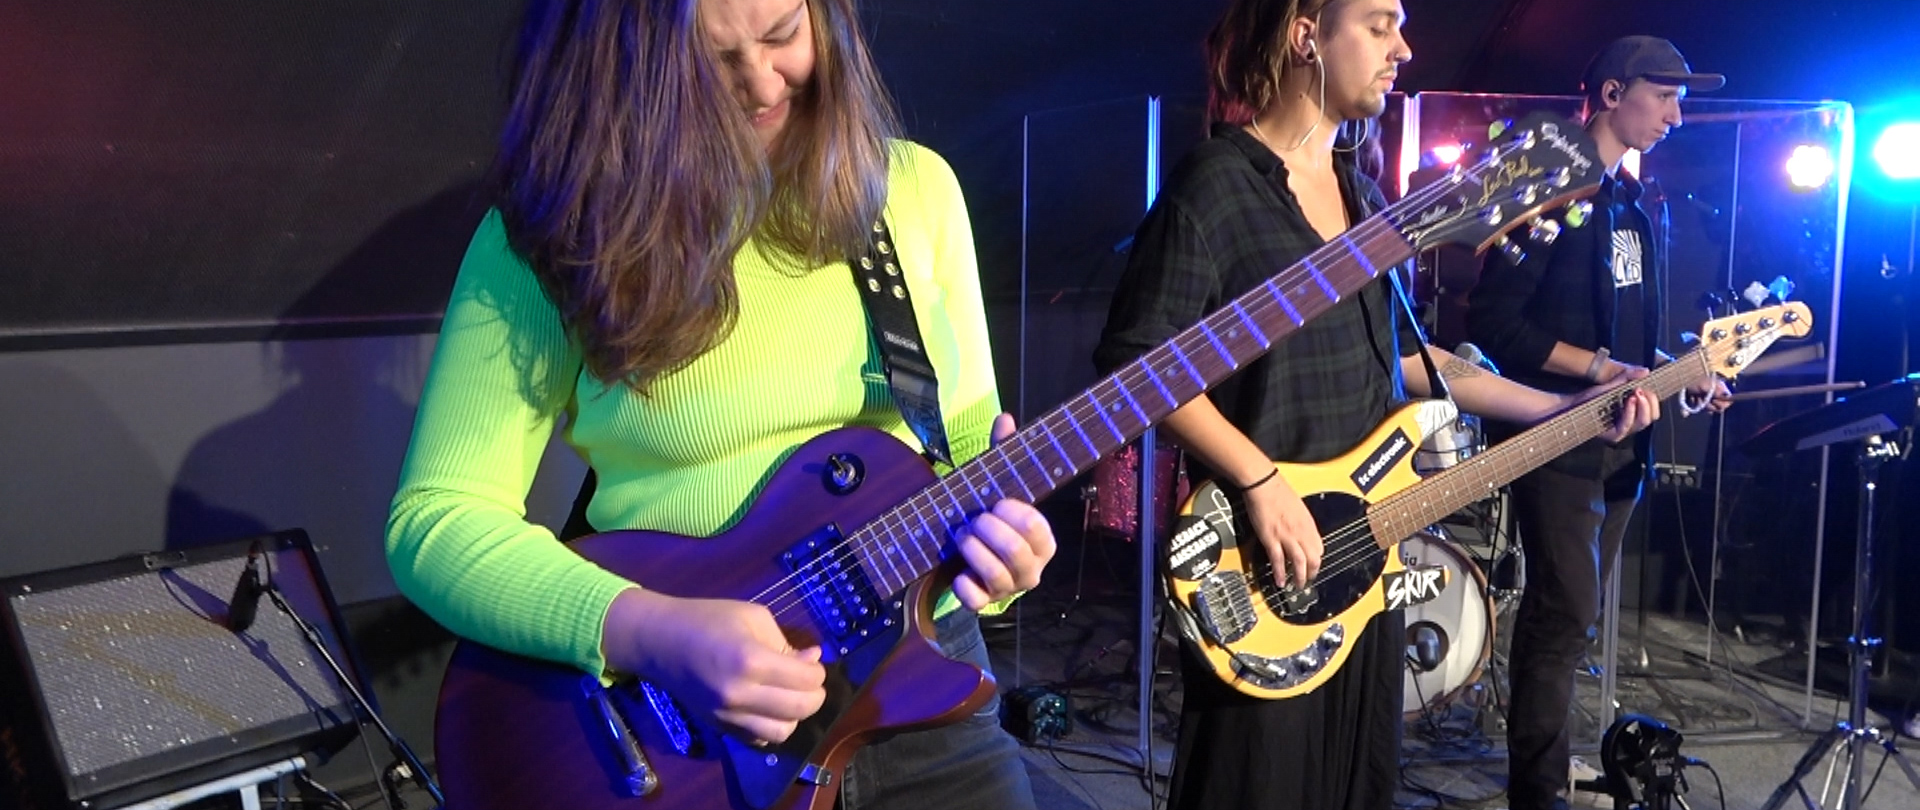 Still from Groei - Suzanne de Jong. A close-up shot of a guitarist. She is wearing a bright neon yellow/green top. Behind her is a bassist and a drummer.